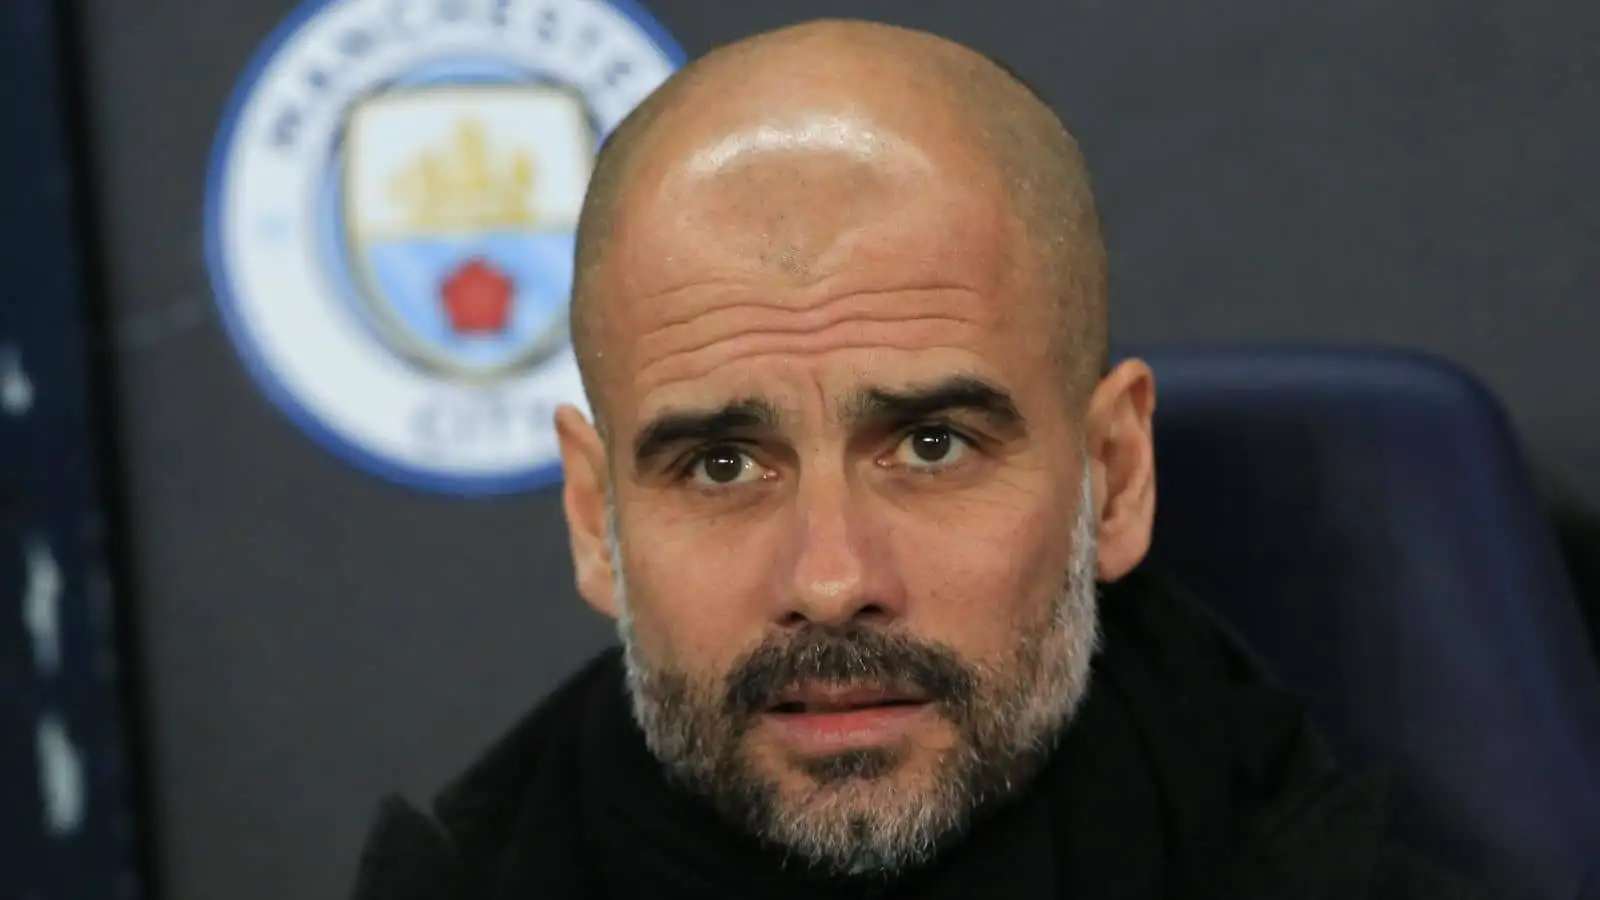 Pep Guardiola, Manchester City manager, during a Champions League game at Etihad Stadium